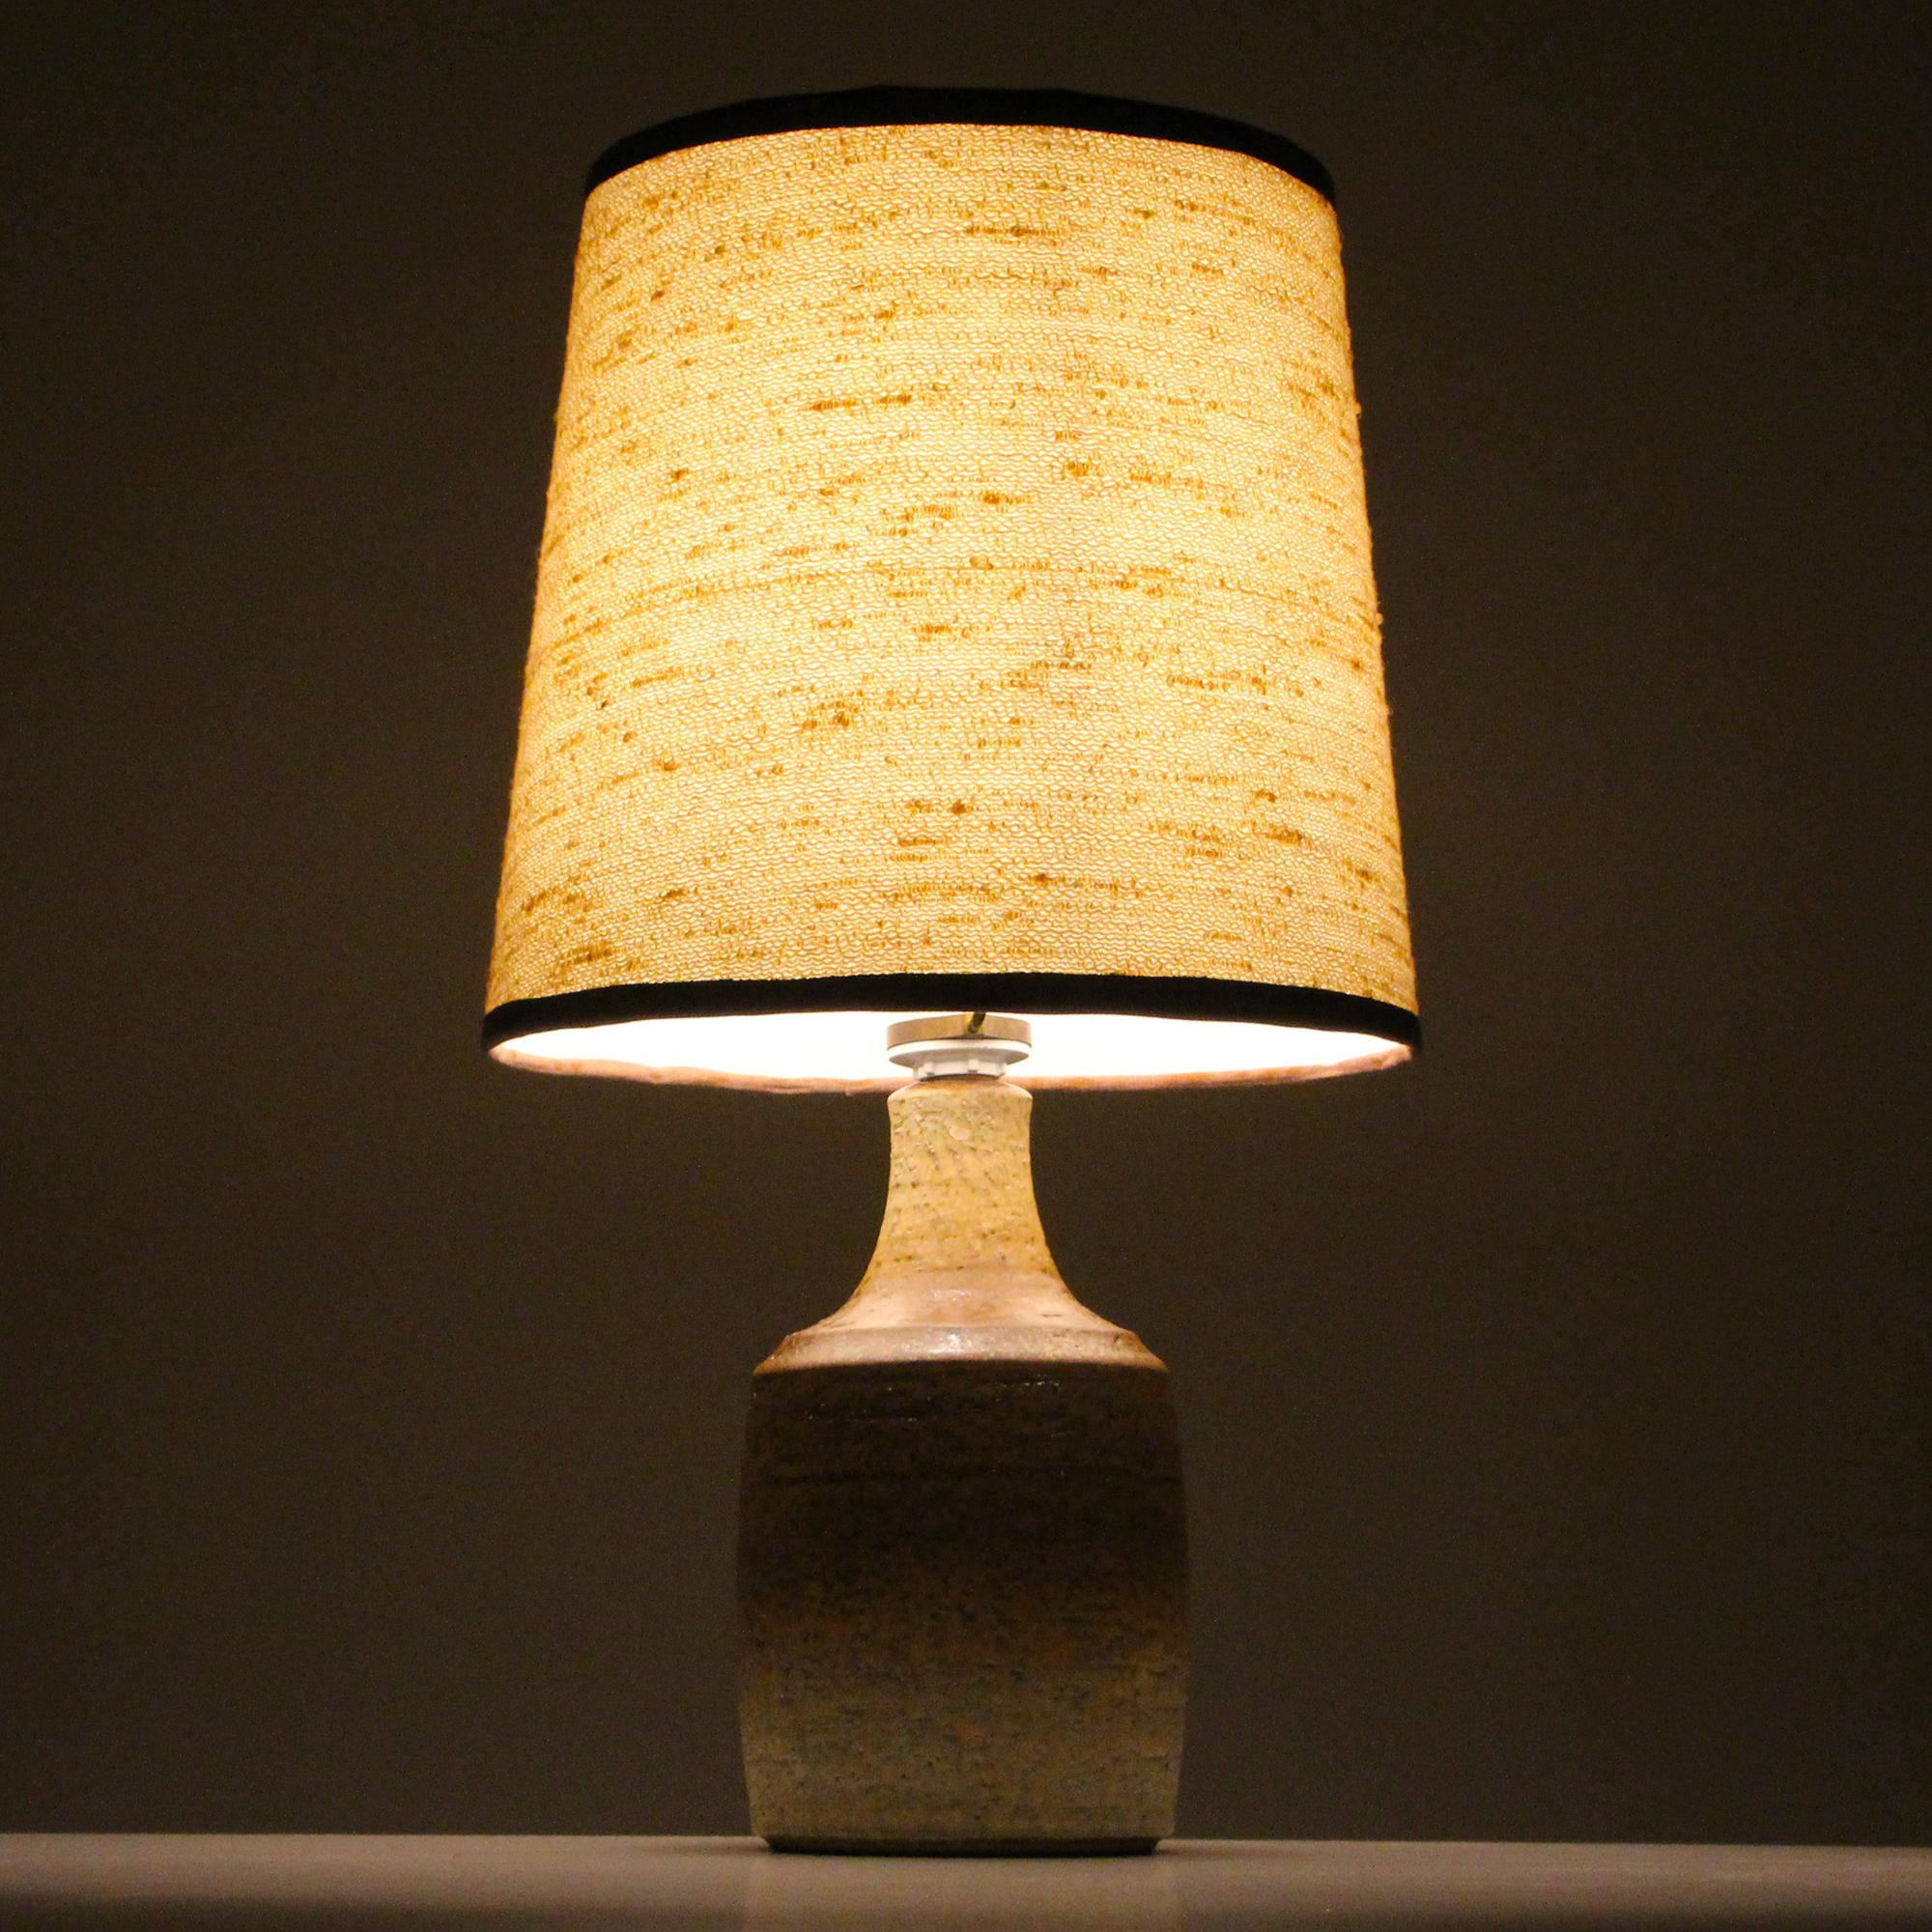 Danish Ceramic Table Lamp by Soholm Stentoj 1970s, with Vintage Shade Included